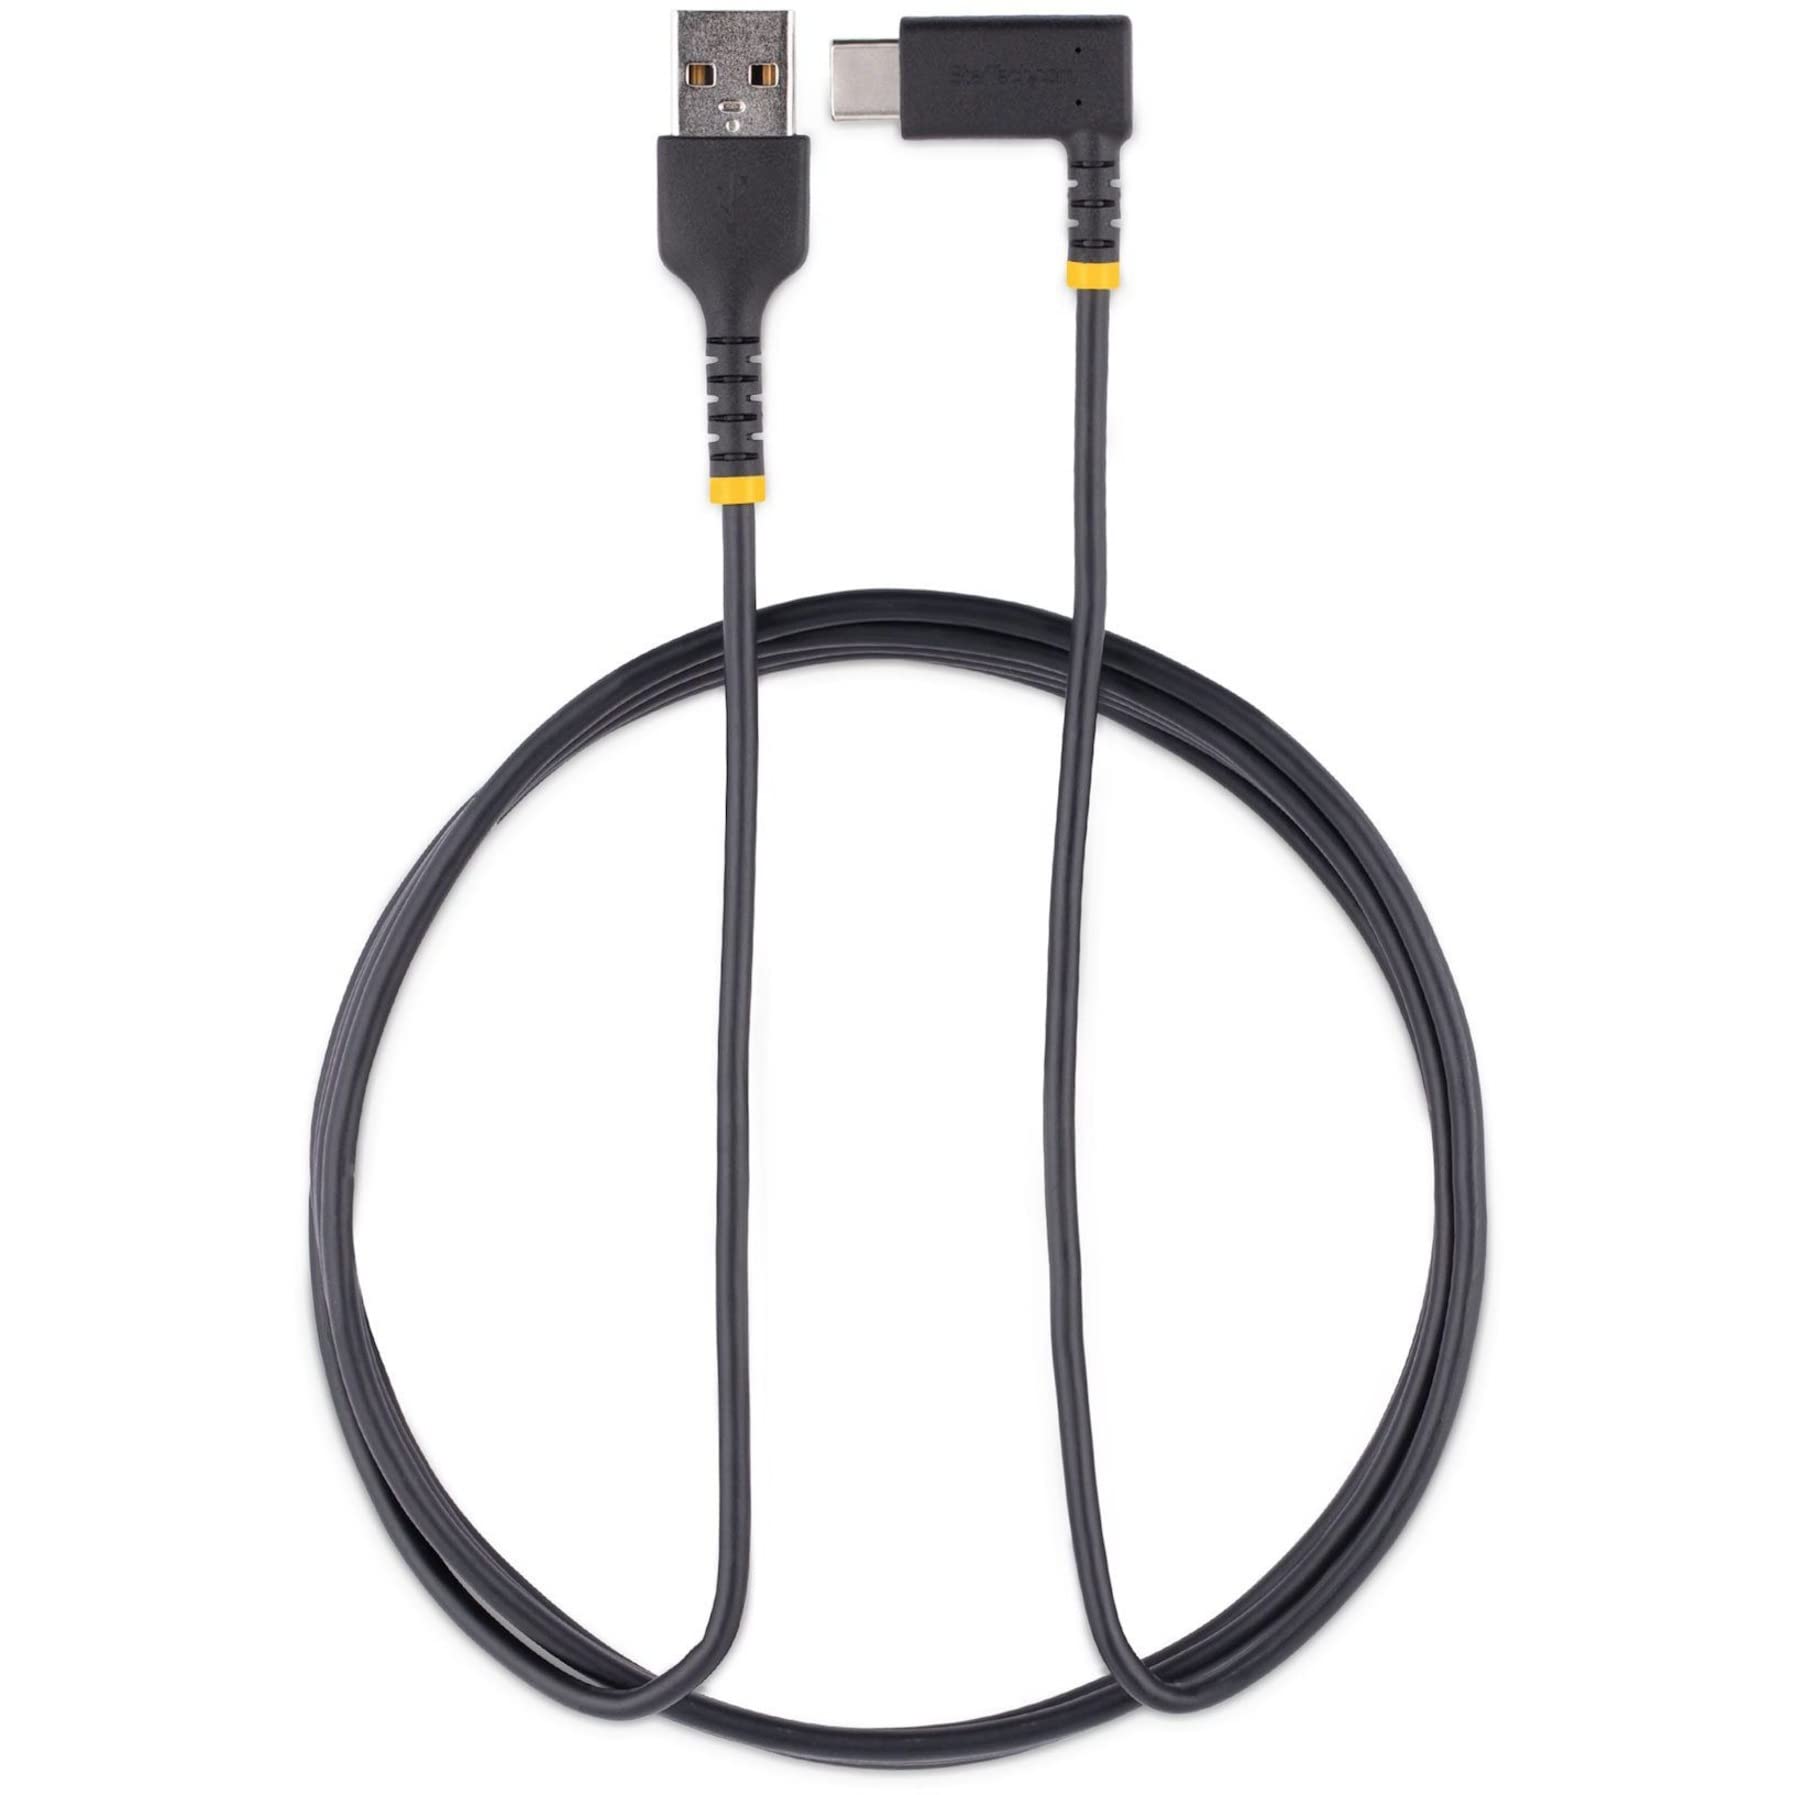 StarTech.com 6ft (2m) USB A to C Charging Cable Right Angle - Heavy Duty Fast Charge USB-C Cable - USB 2.0 A to Type-C - Rugged Aramid Fiber - 3A - USB Charging Cord (R2ACR-2M-USB-CABLE)